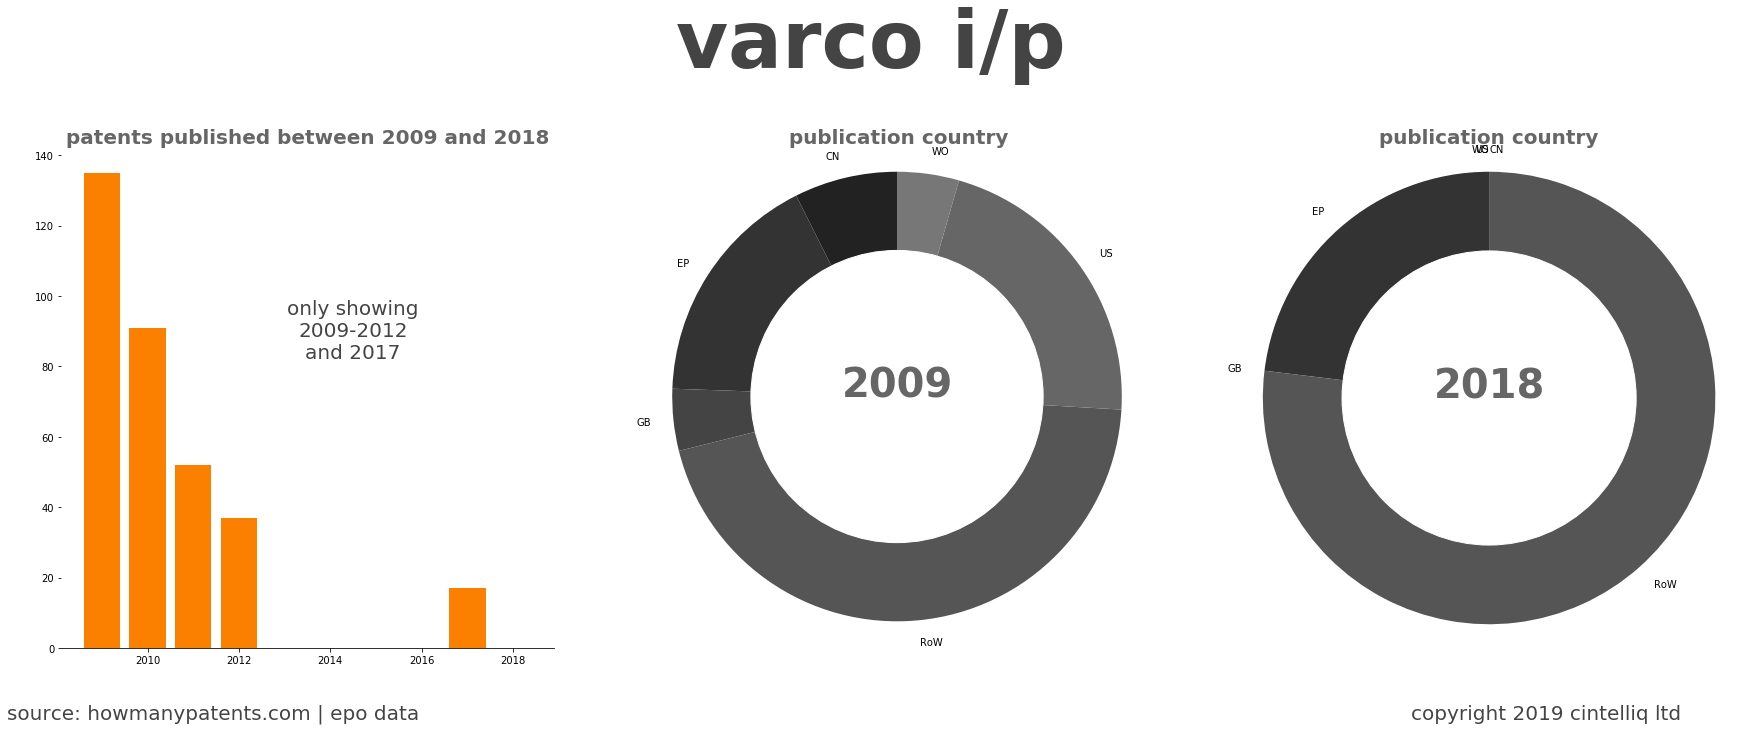 summary of patents for Varco I/P